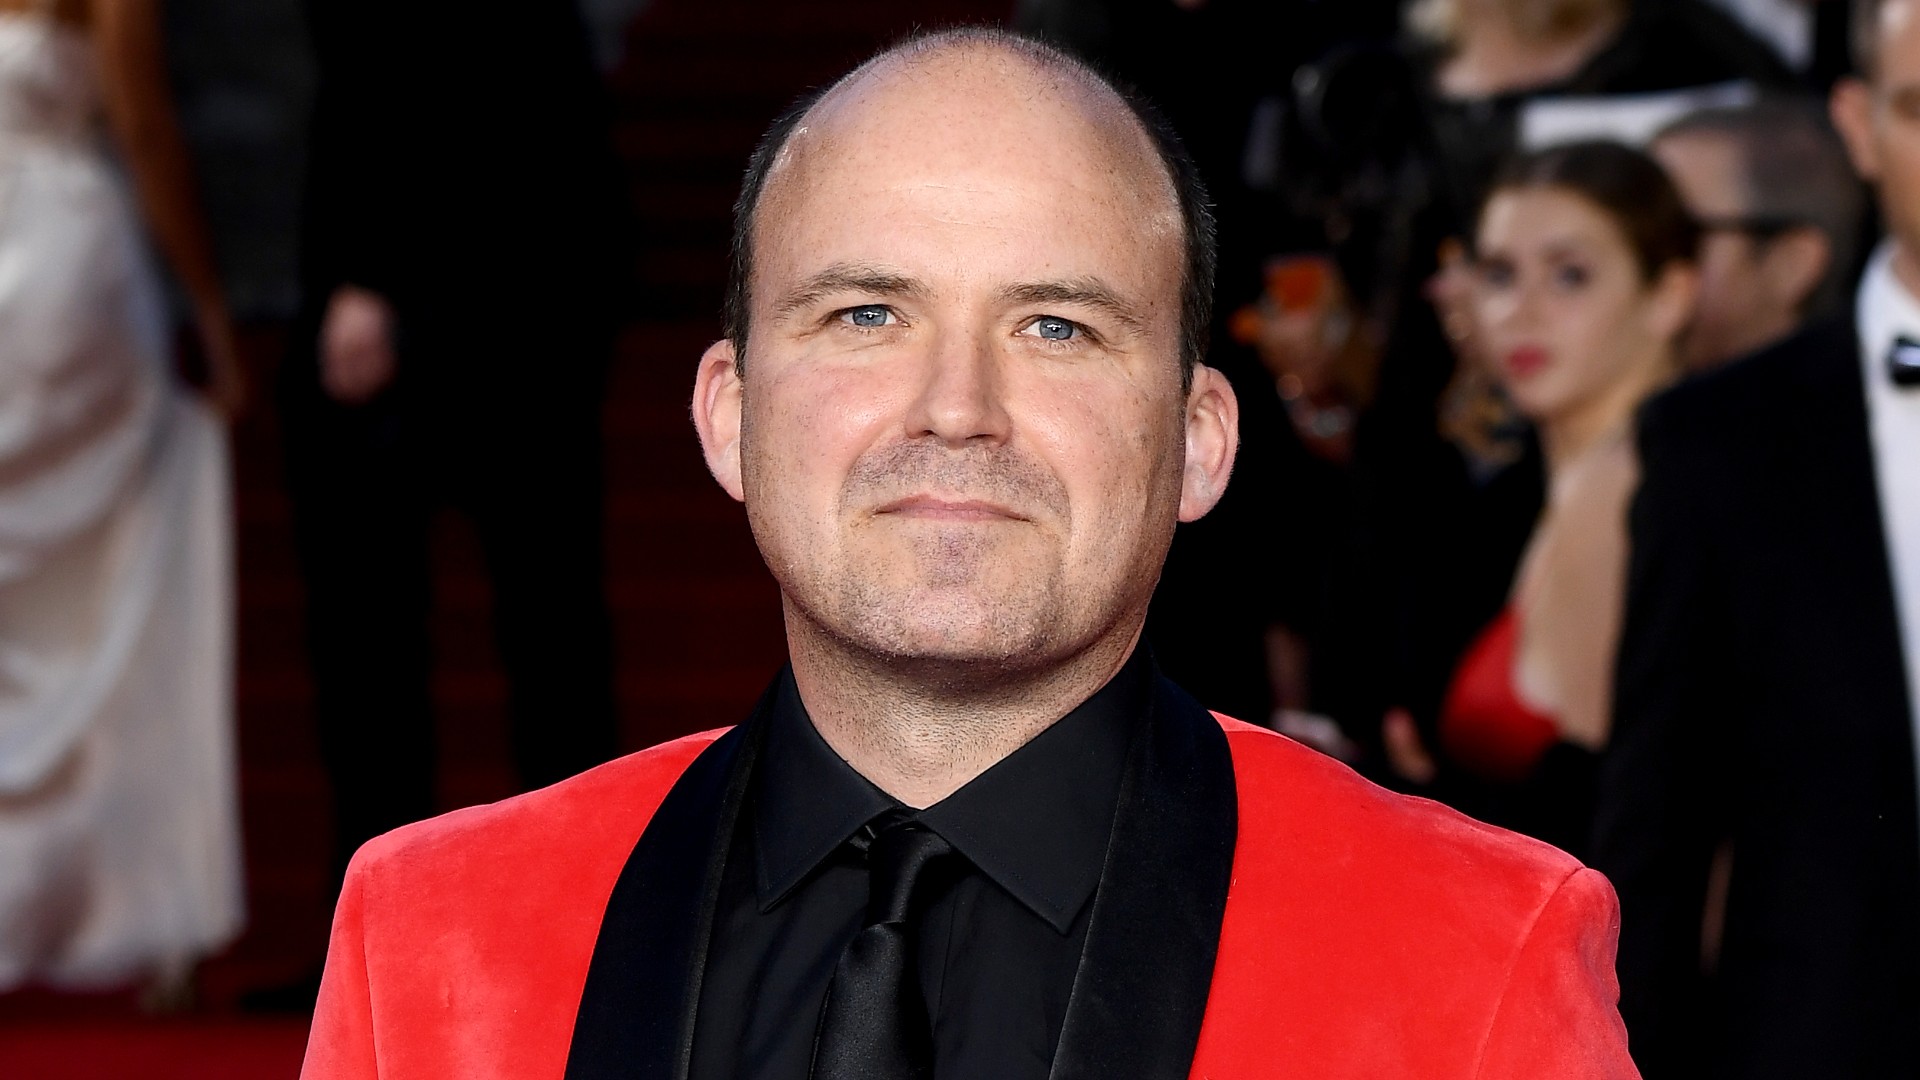 10 Things You May Not Know About Rory Kinnear